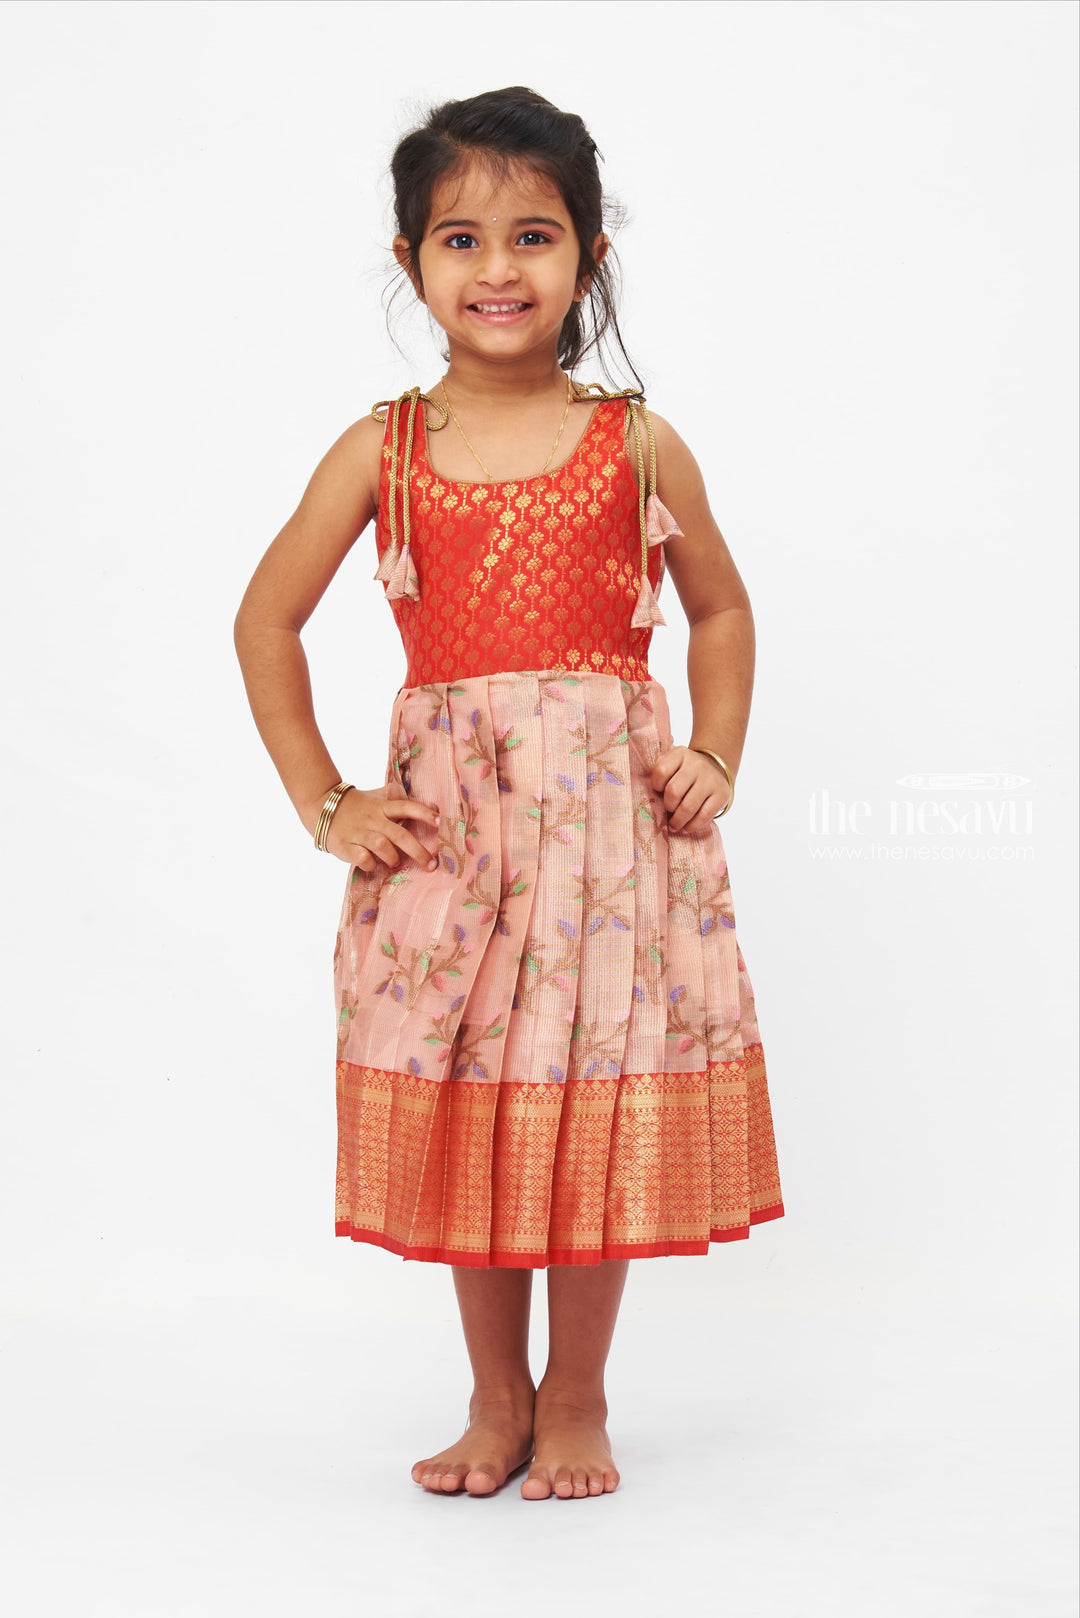 The Nesavu Tie Up Frock Blossoming Blush Silk Frock with Tie-Up Accents for Girls Nesavu 16 (1Y) / Pink / Silk T265E-16 Traditional Blush & Red Silk Frock for Girls | Floral Embroidery Dress | The Nesavu